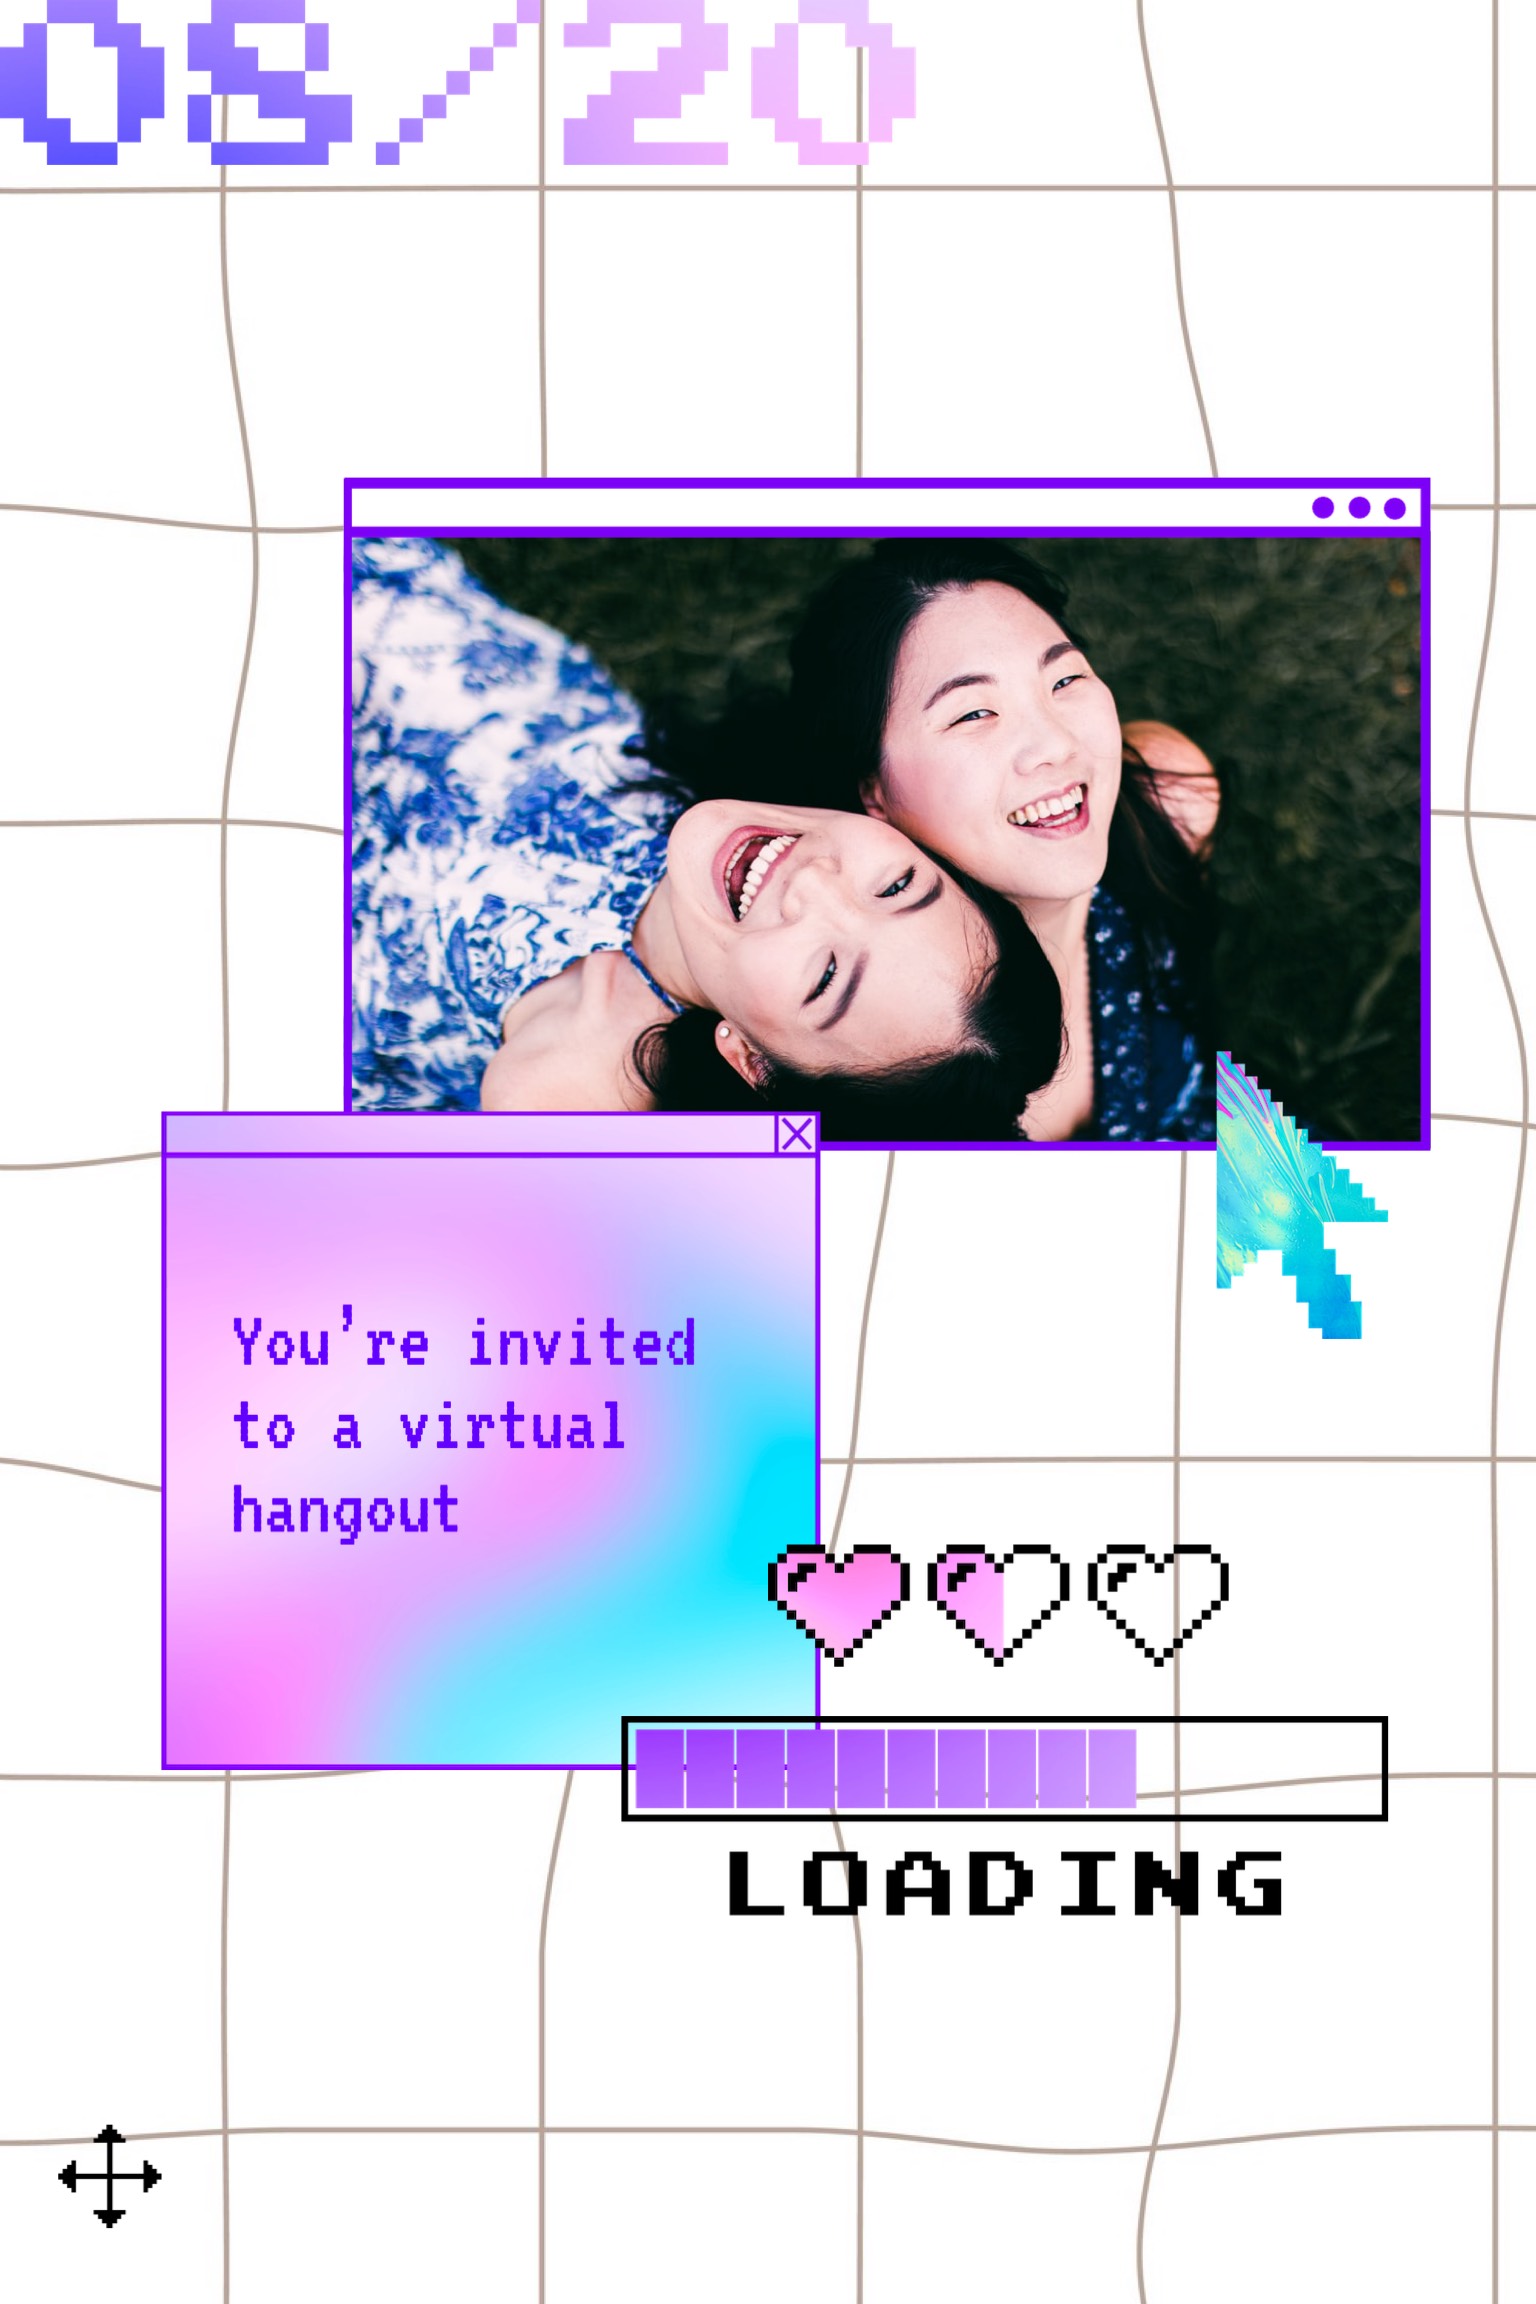 Virtual hangout man and woman laughing computer style invitation template